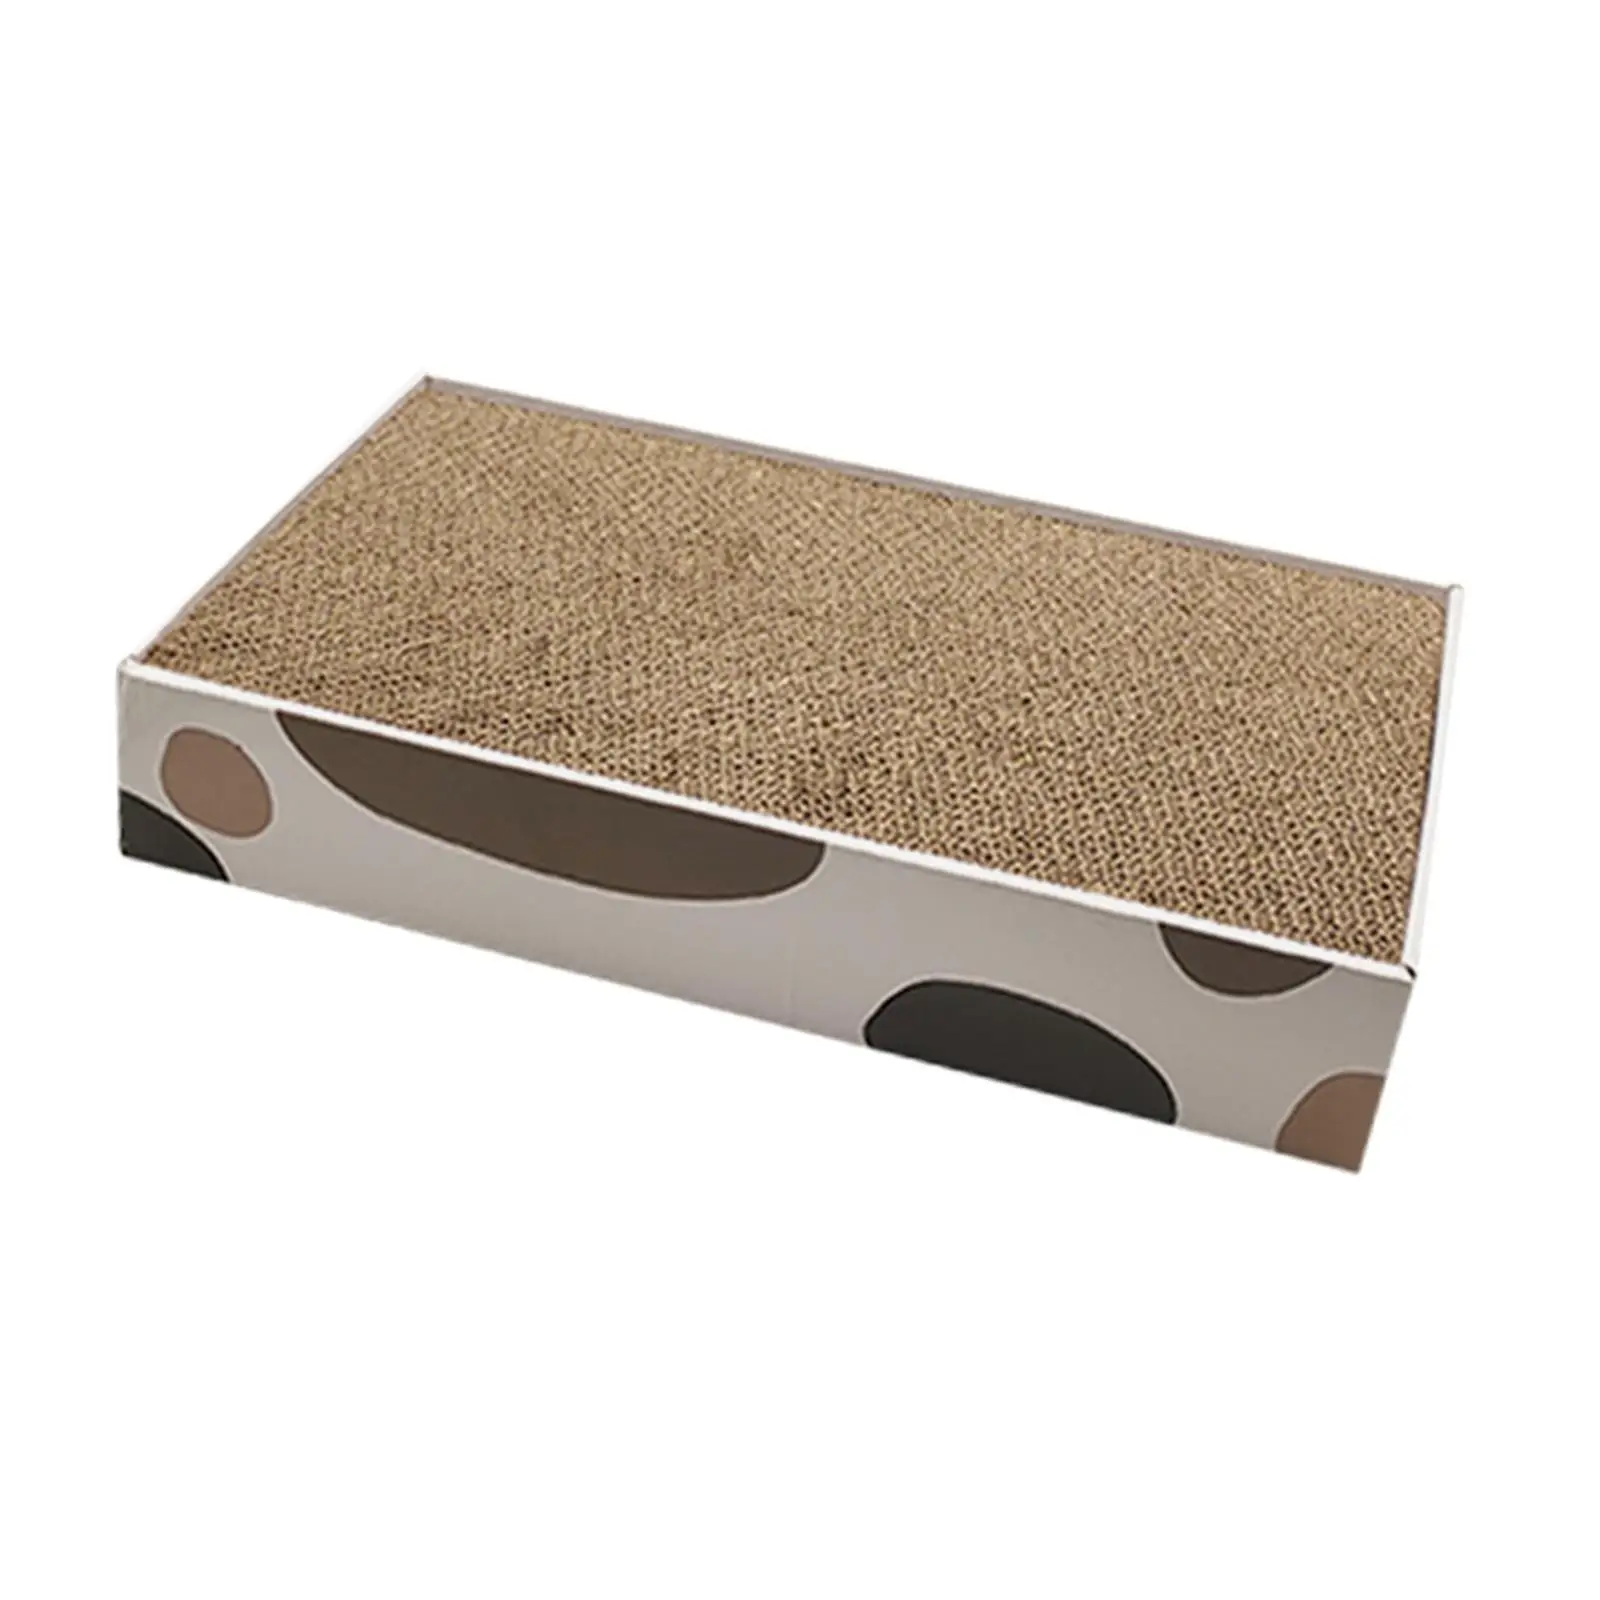 Reversible Pet Cat Scratcher Cardboard Scratching Pads with Box Corrugated Paper Replacement Wear Resistant Kitten Scratch Bed